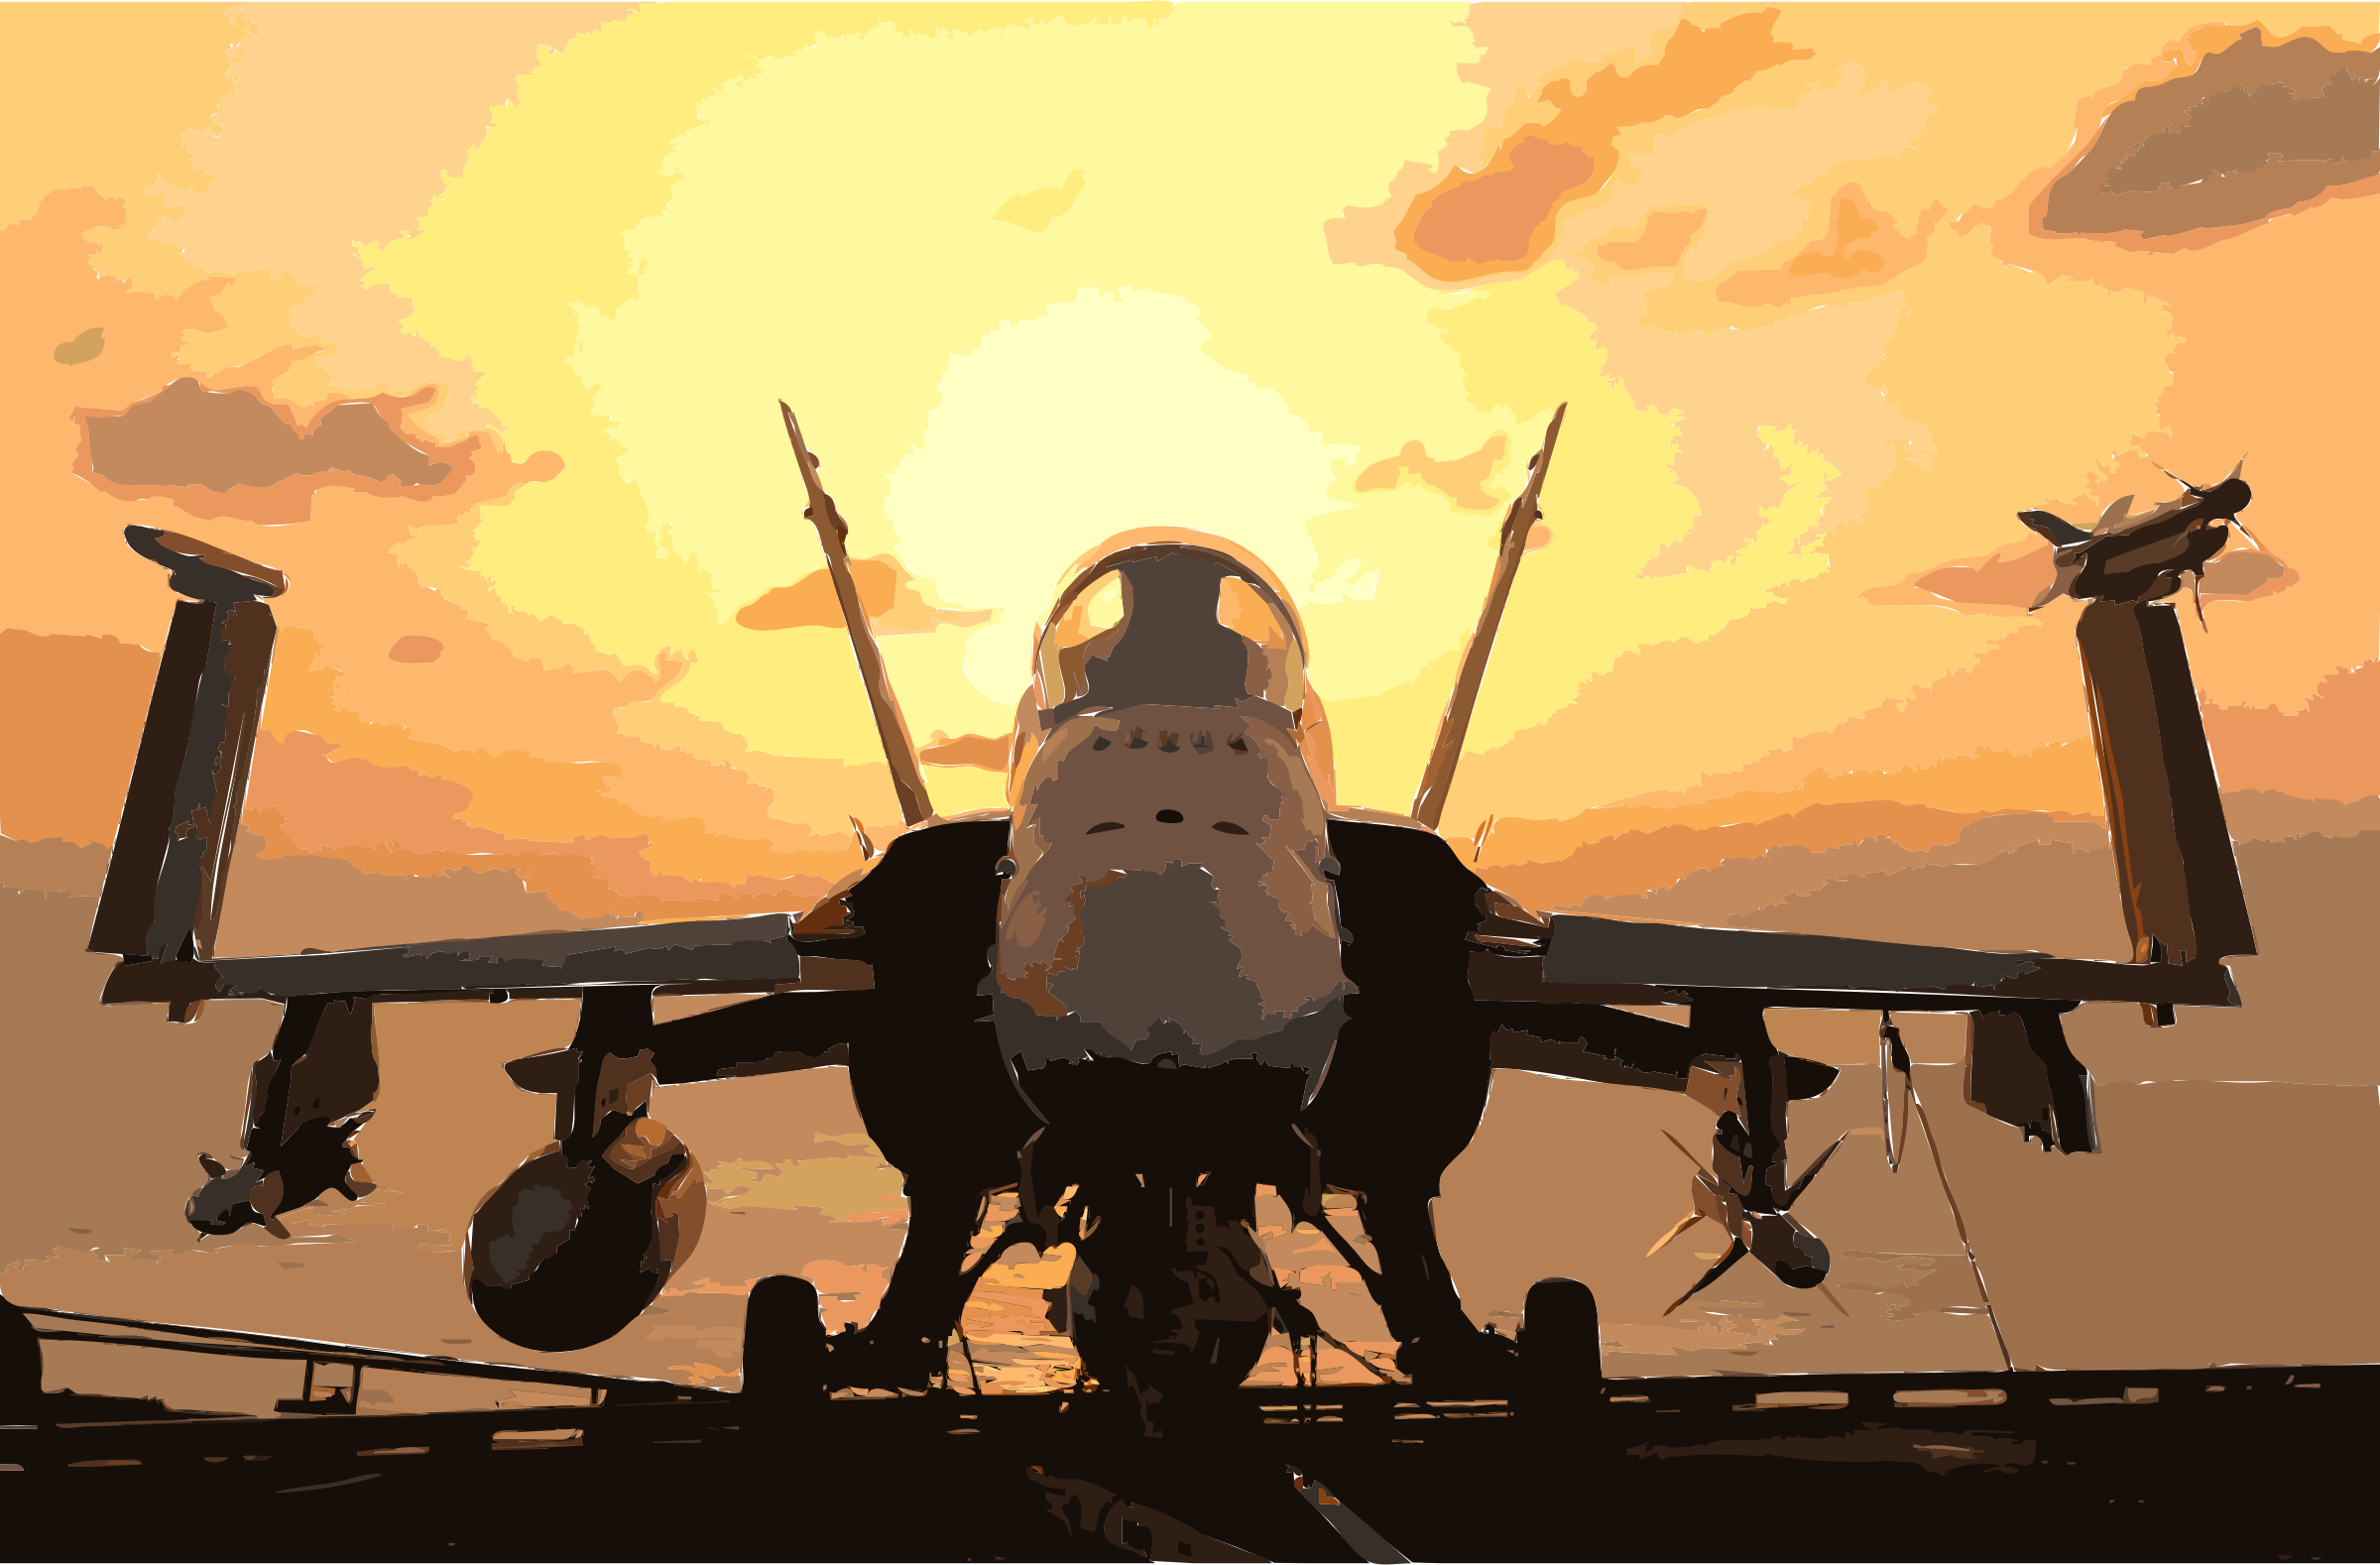 011218-N-9769P-047 F-A-18 With Weapons Ready for Mission Clip arts